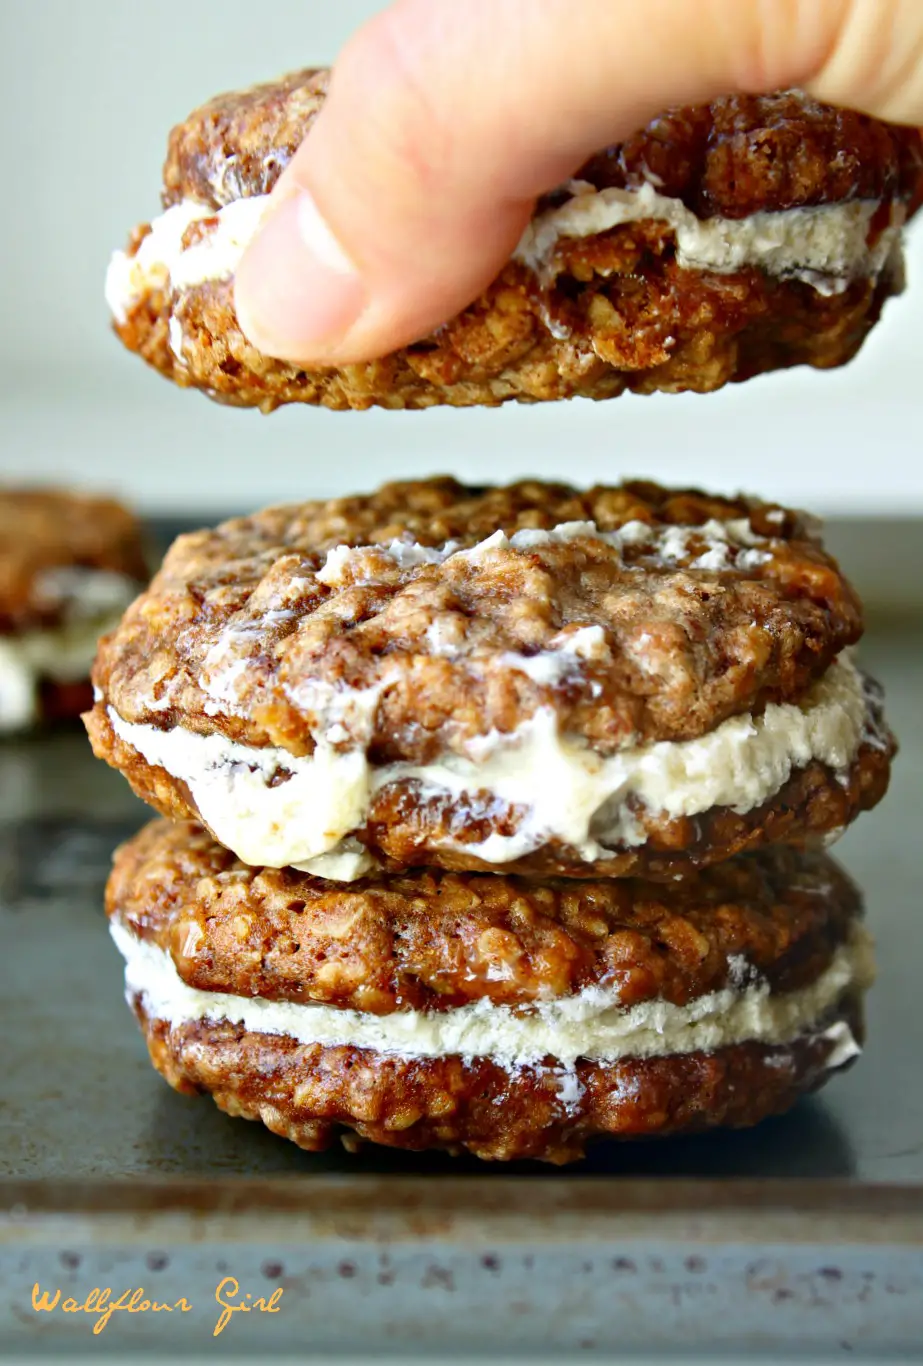 Biscoff Oatmeal Cookie Pies with Whipped Coconut Filling 18--042414